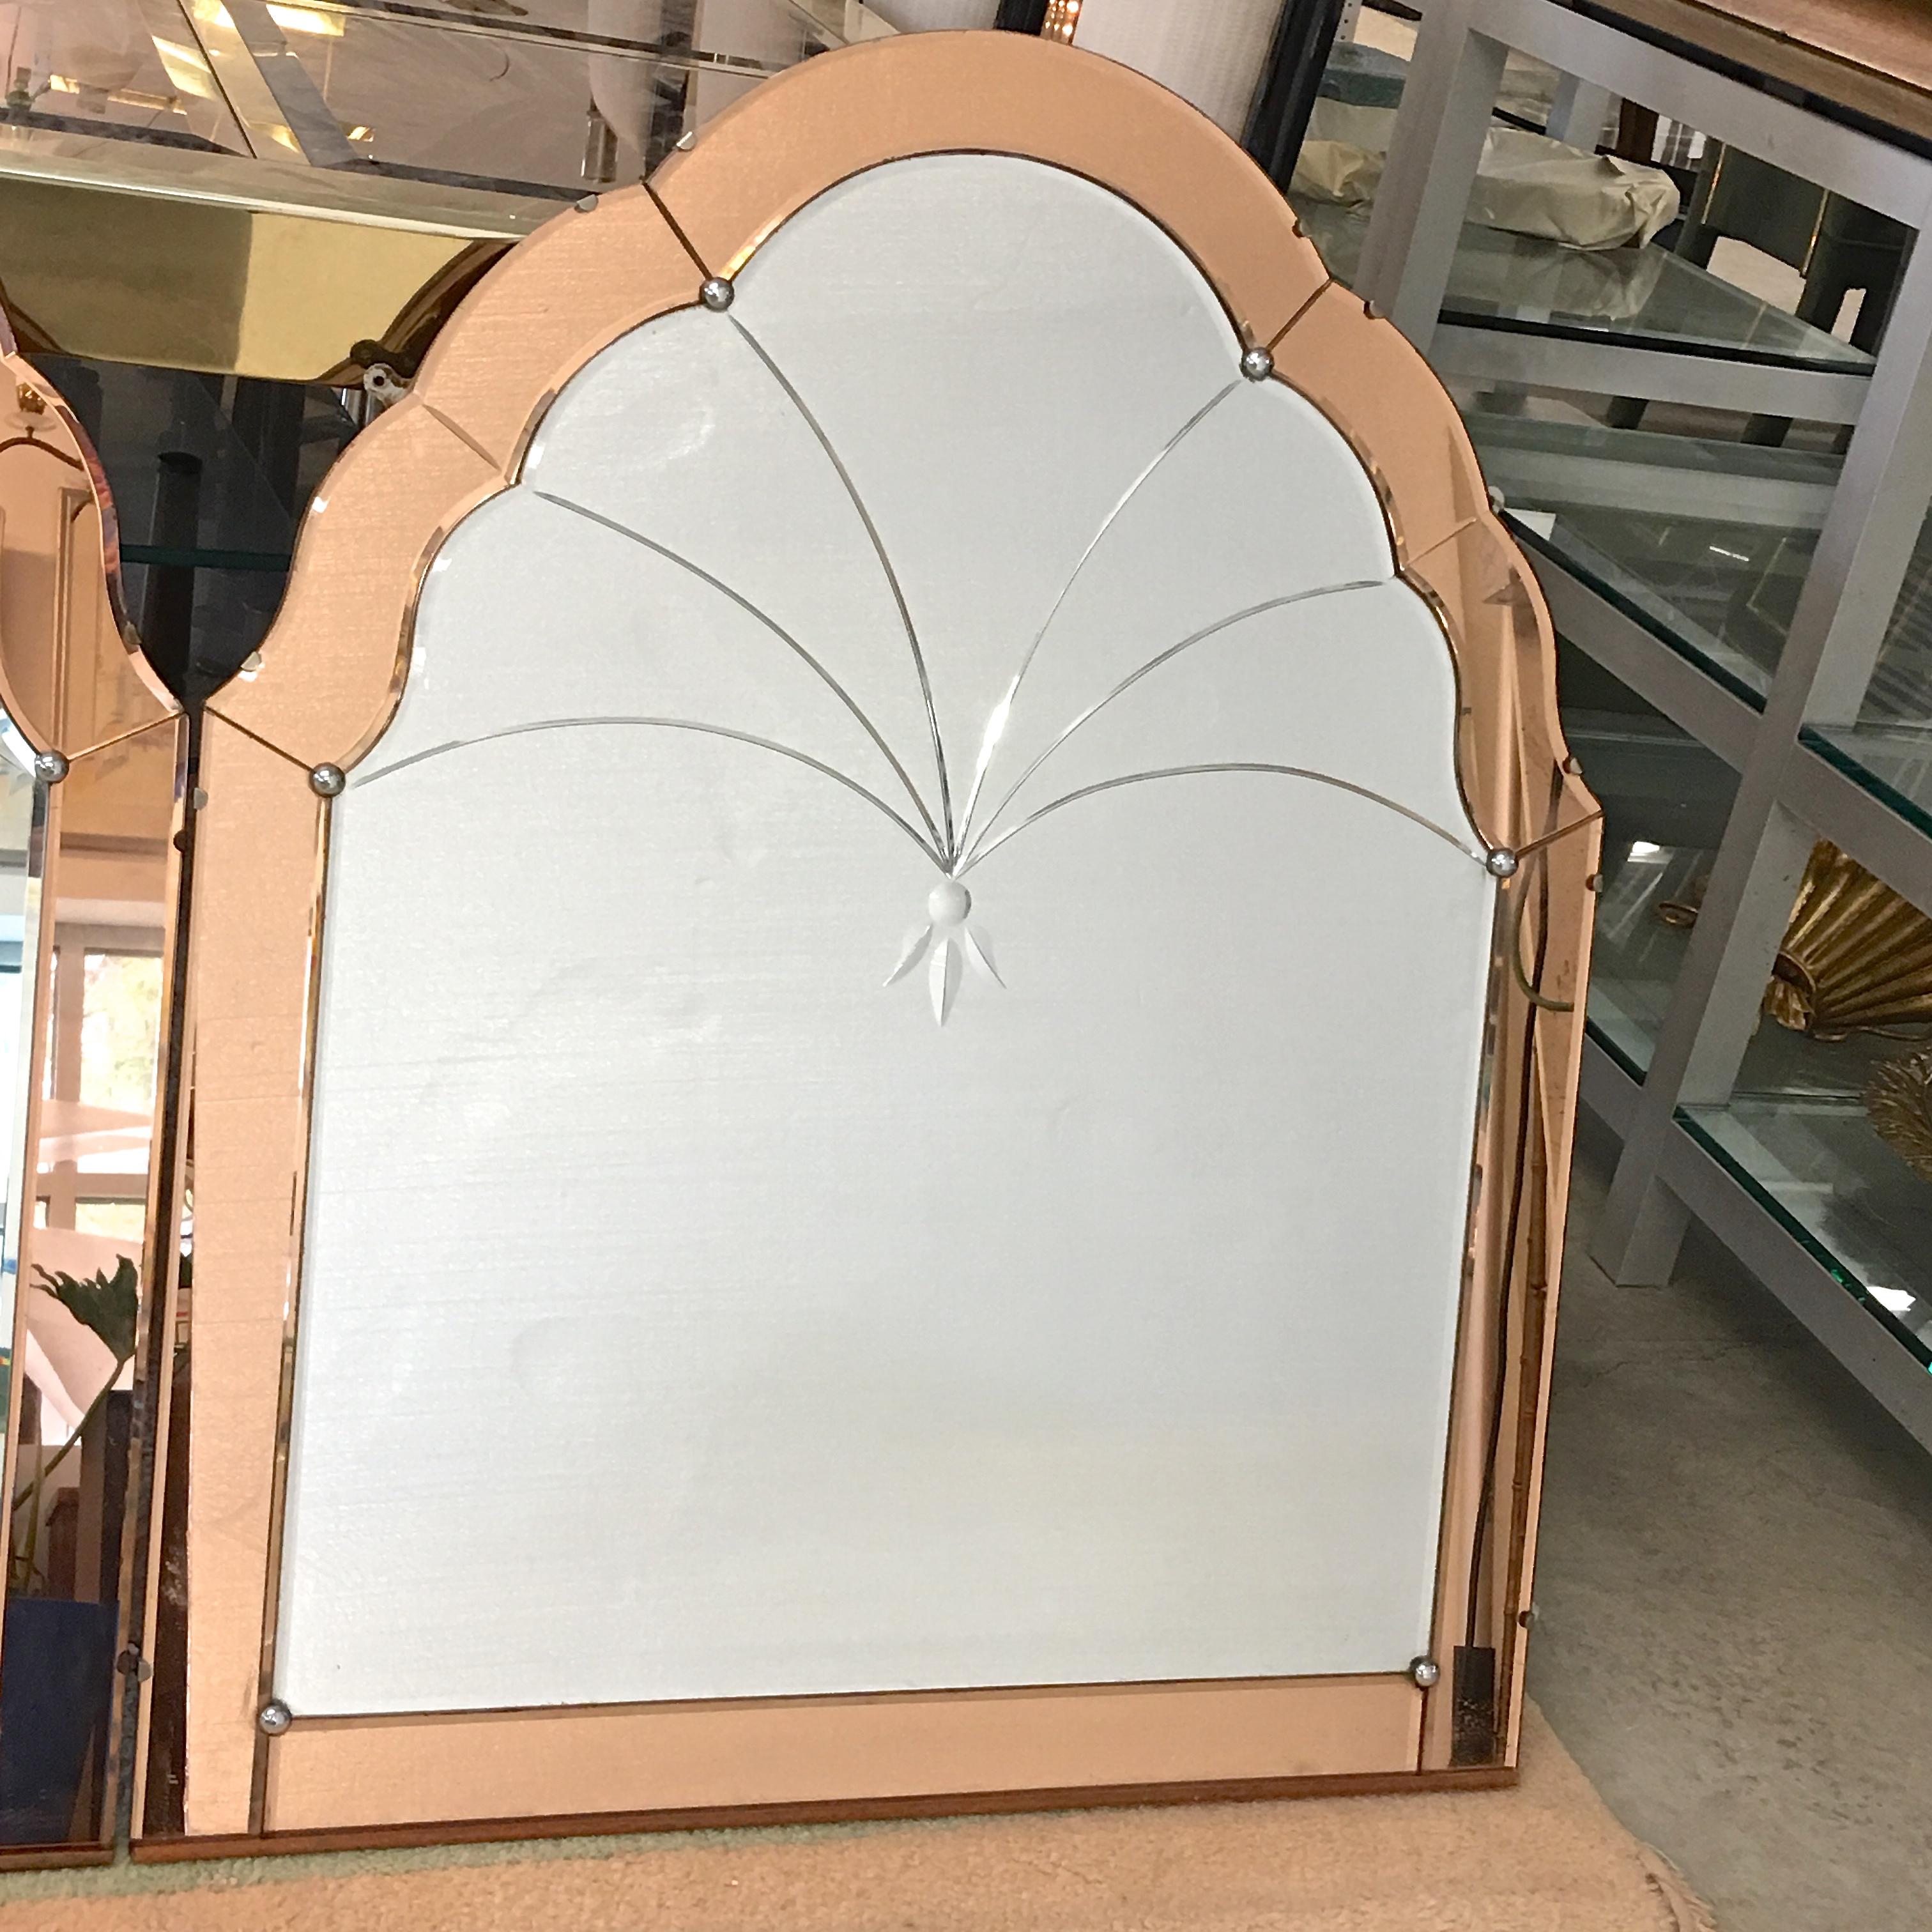 
Pair of 1930's Venetian wall mirrors of arched form with scalloped edges, having bevel cut design to the central mirror with apricot peach colored mirrored glass surrounds. Finished with a panel board back. 

Price is for the pair.